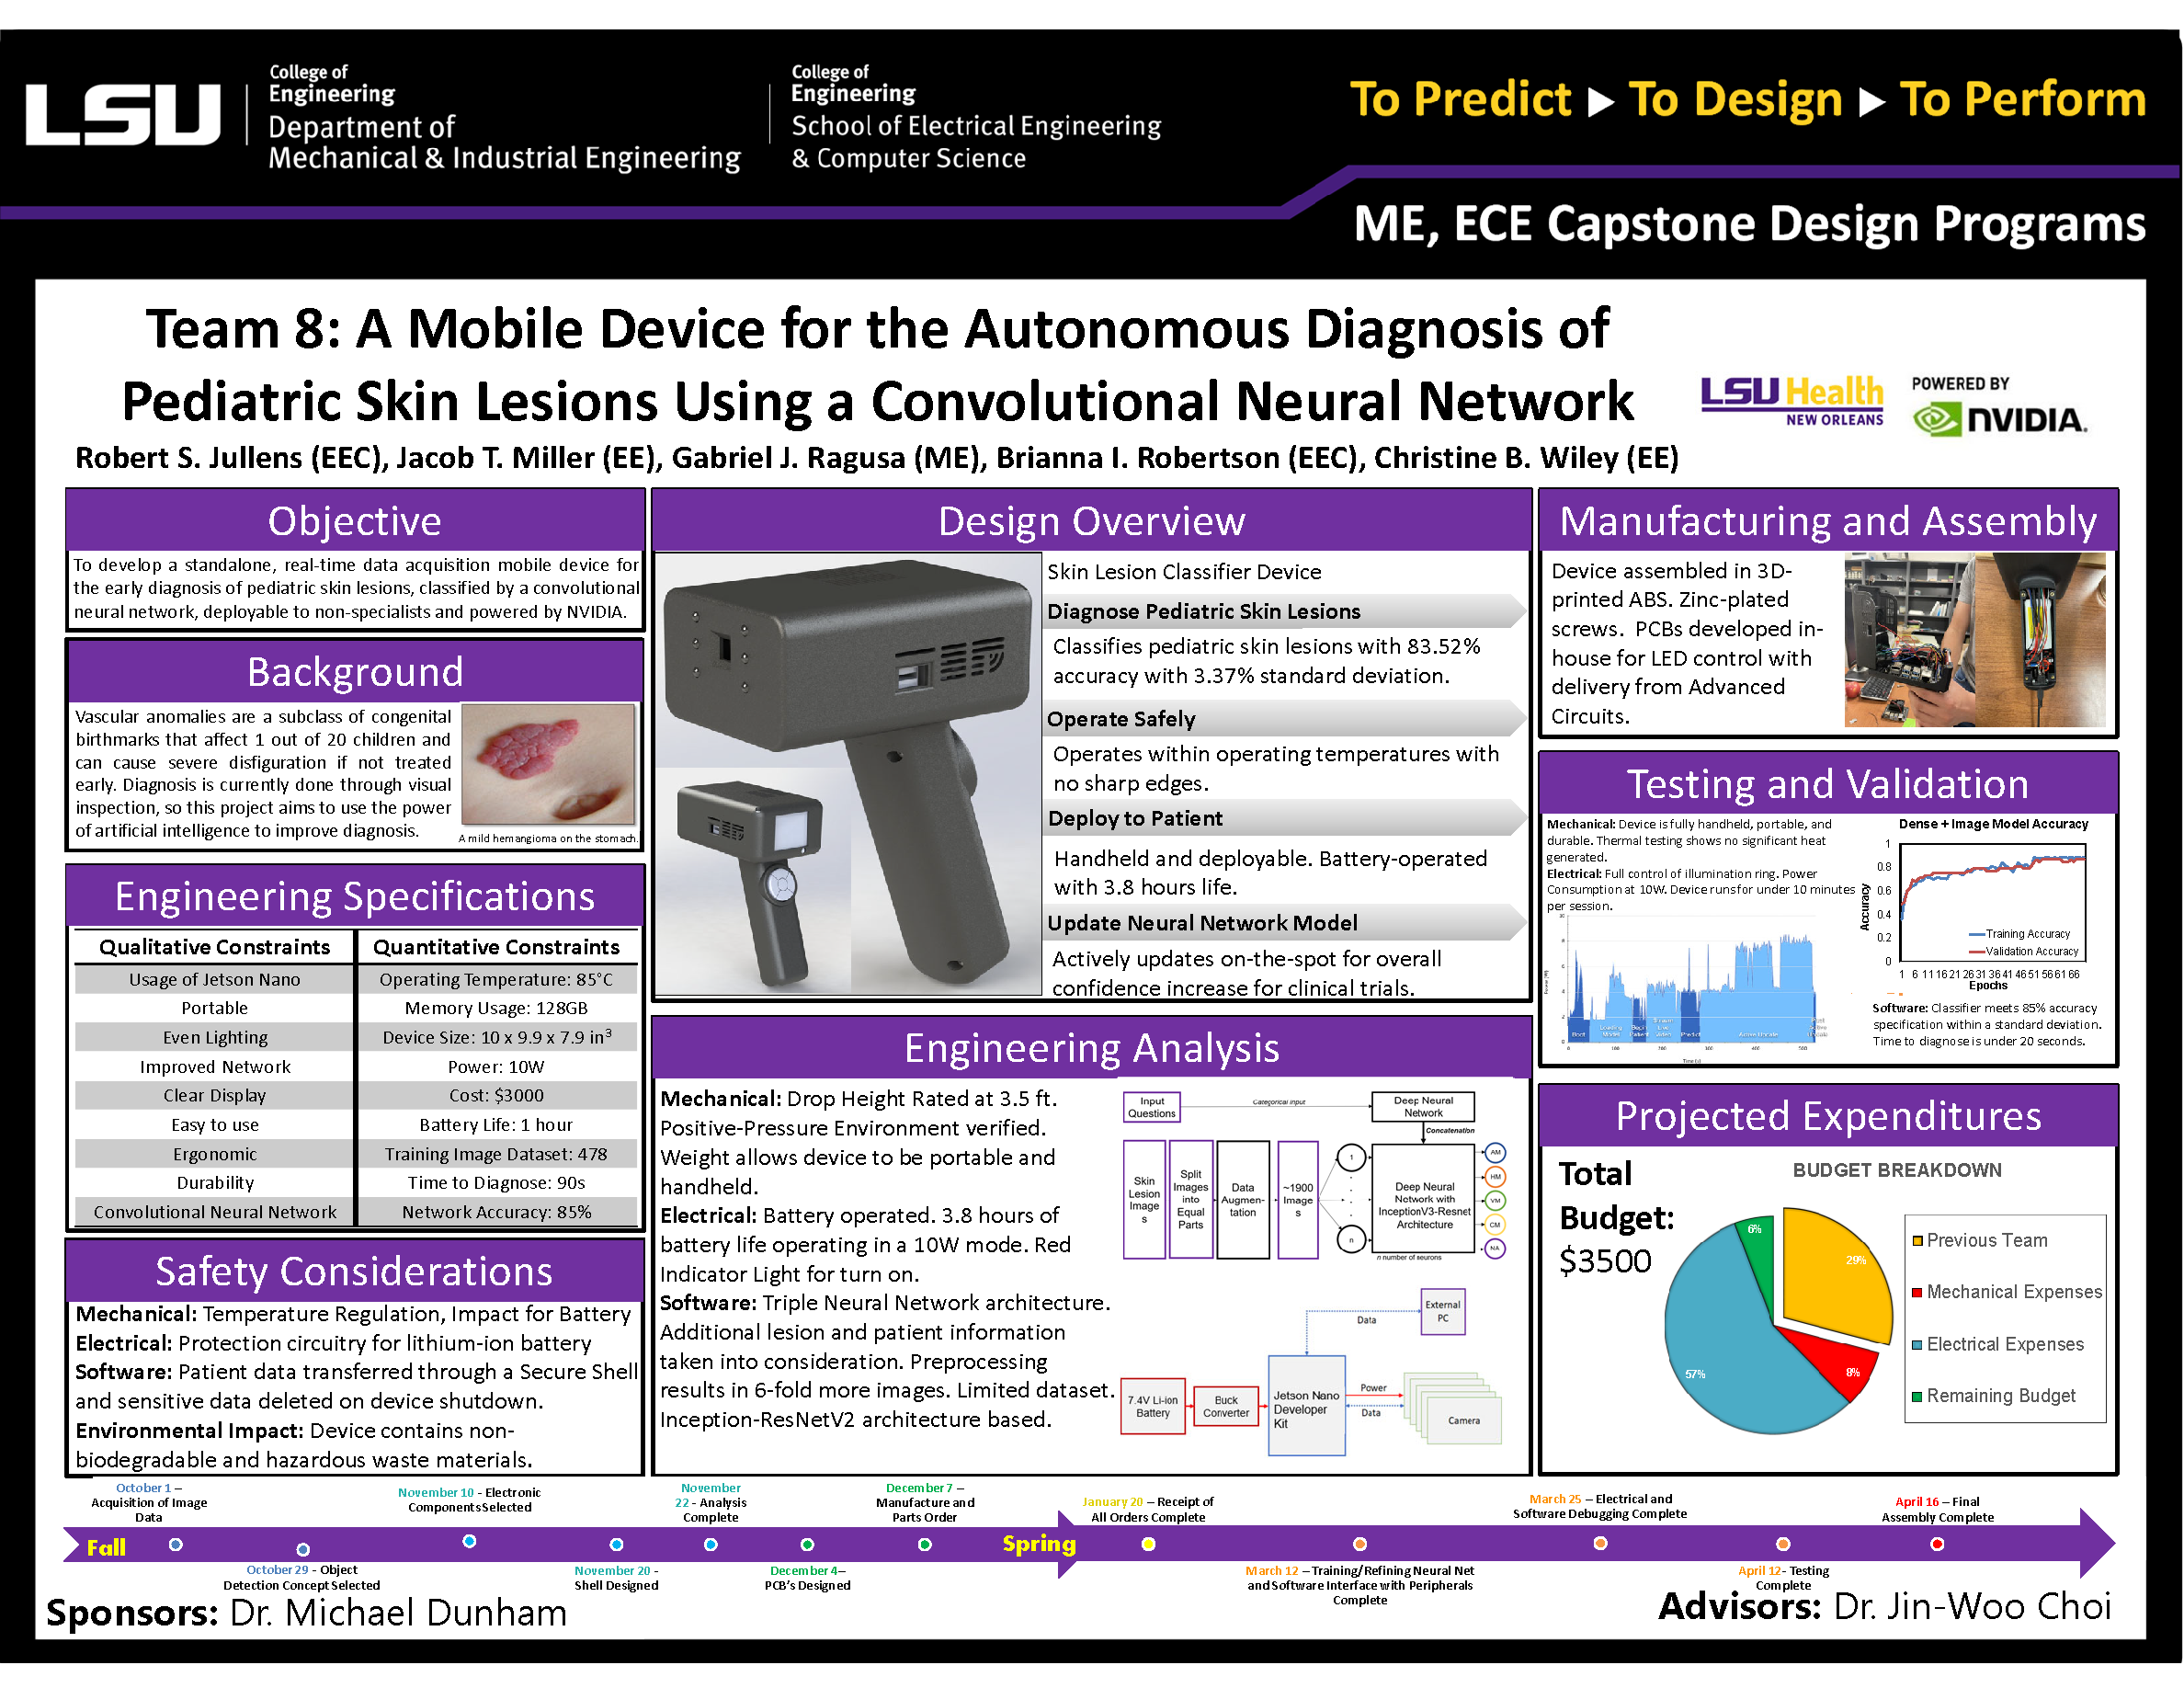 Project 8: A Mobile Device for the Autonomous Diagnosis of Pediatric Skin Lesions Using a Convolutional Neural Network  (2021)